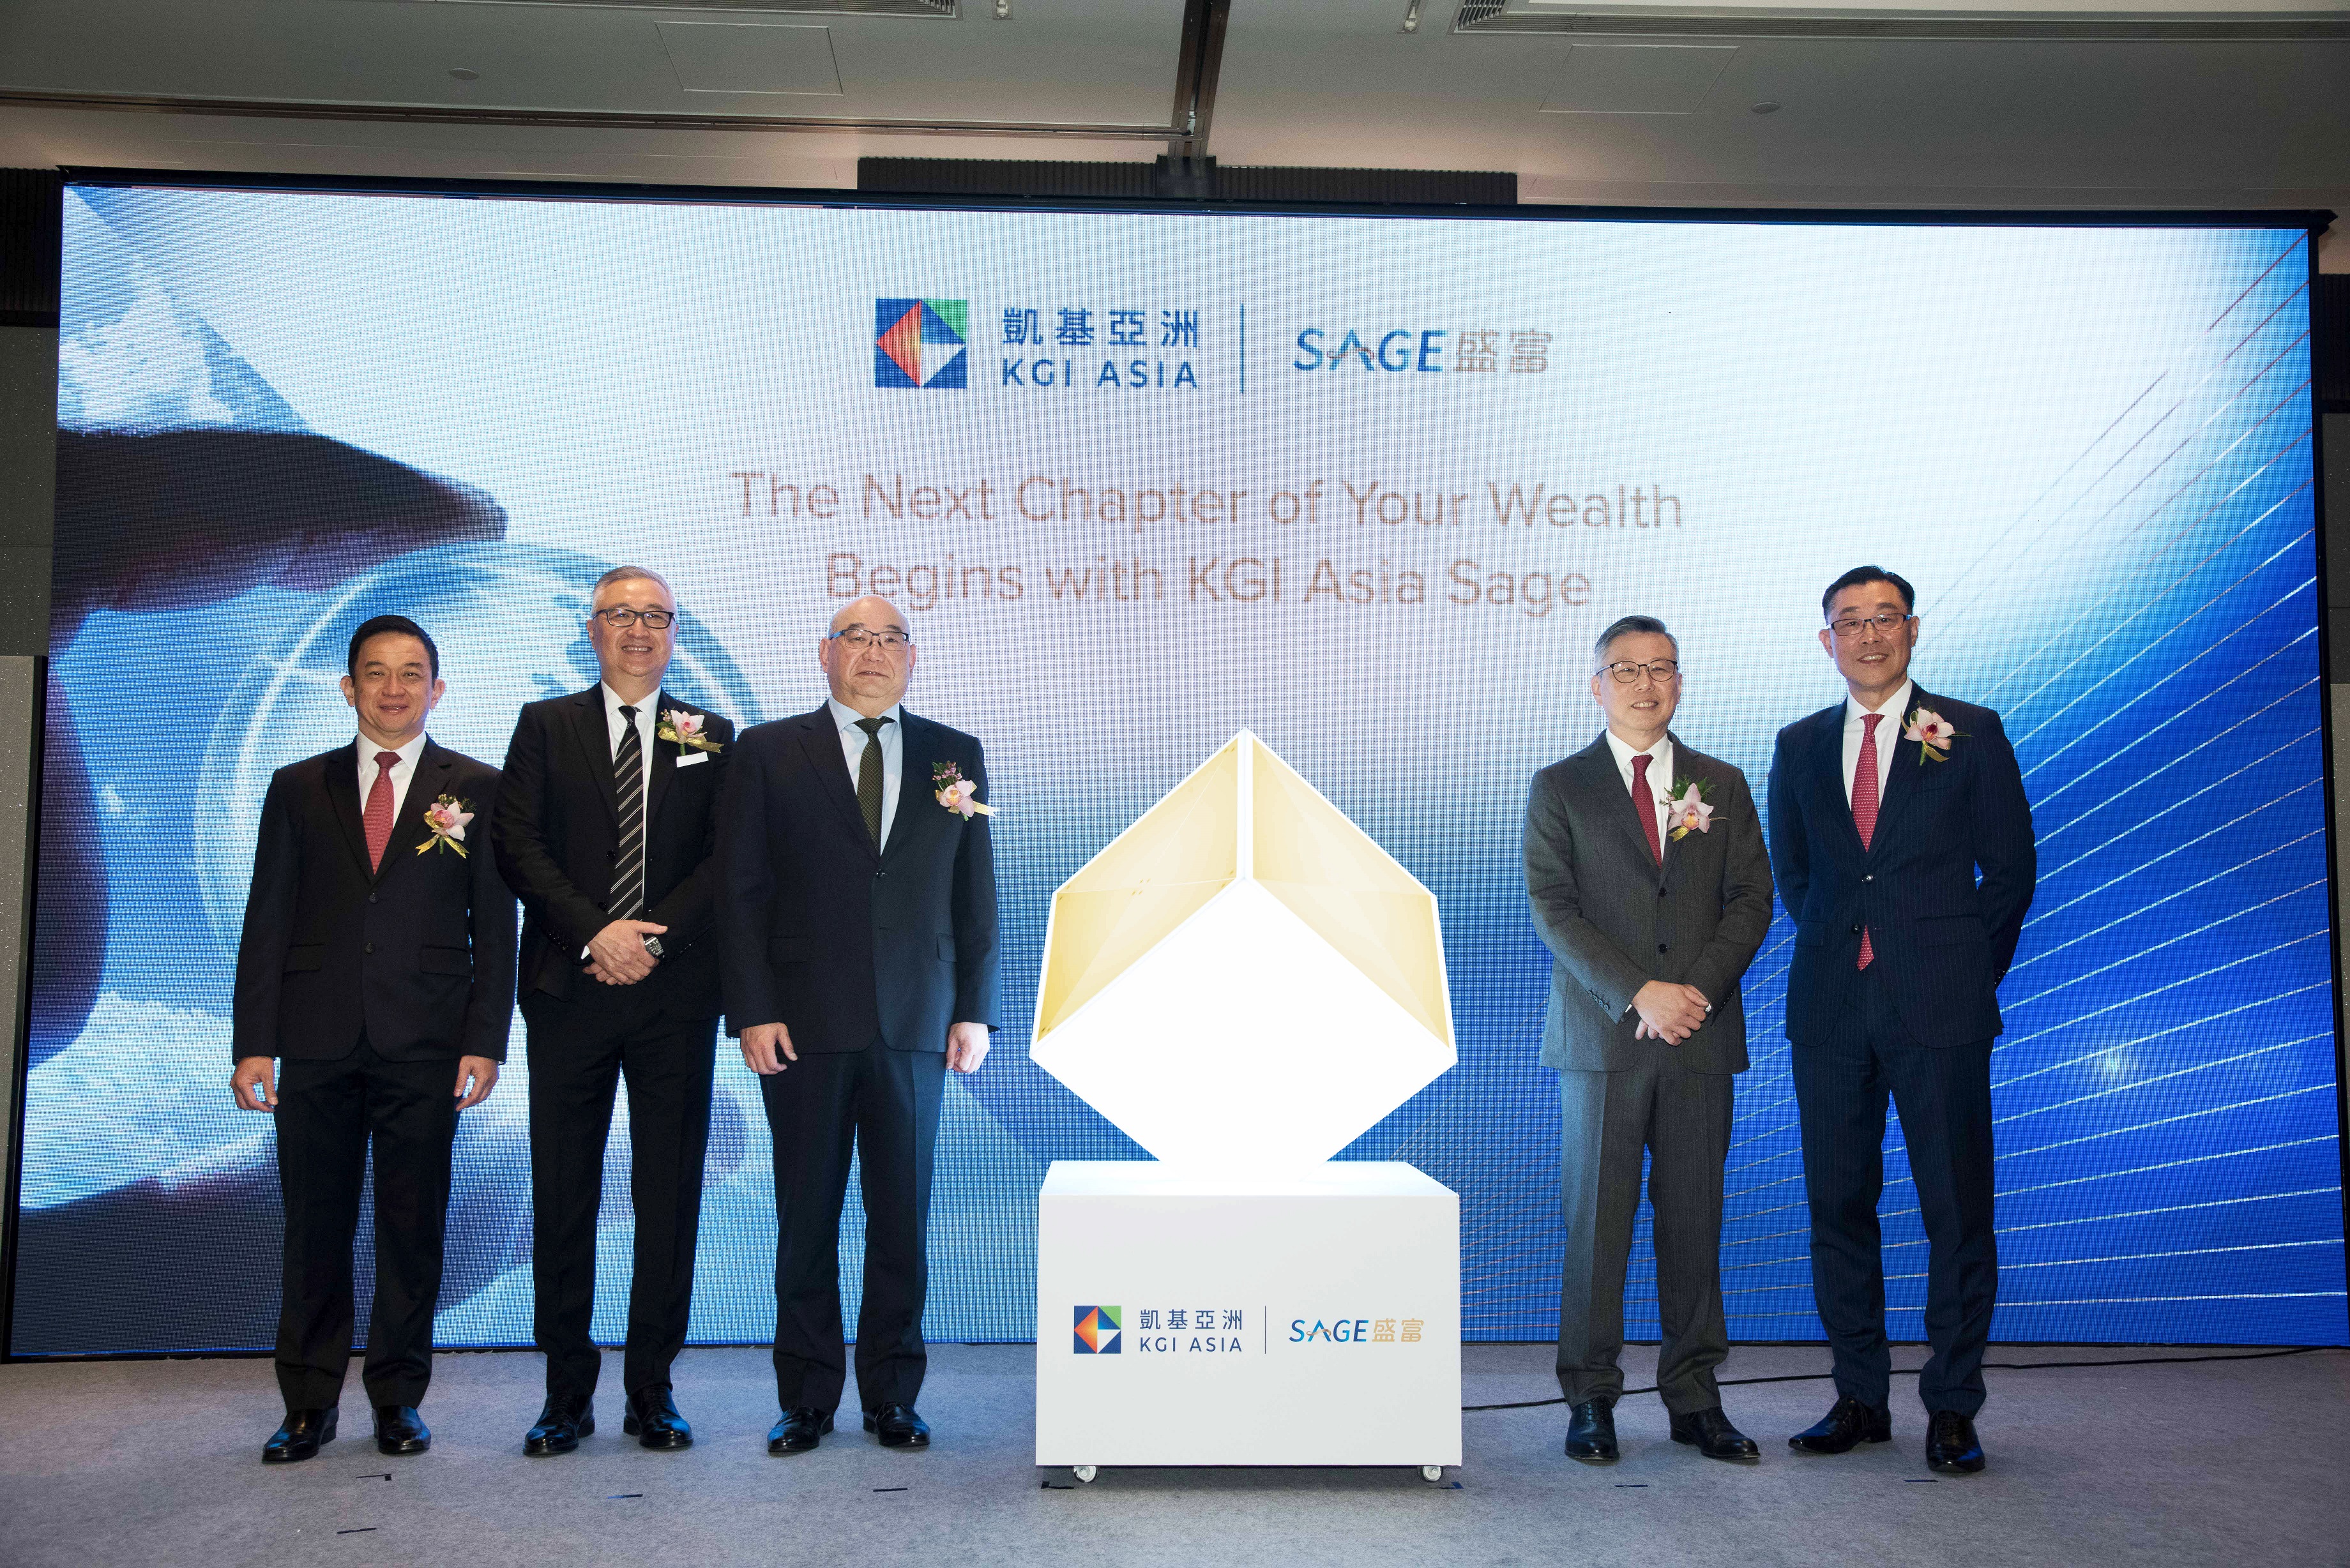 (From Left) Antony Kristanto, President Director, KGI Asia, Indonesia; Patrick Lin, Head of Global Markets, KGI Asia, Hong Kong; William Fang, President, KGI Securities; Reddy Wong, Chief Executive Officer, KGI Asia, Hong Kong; and Kevin Tai, Head of International Wealth Management, KGI Asia, Hong Kong